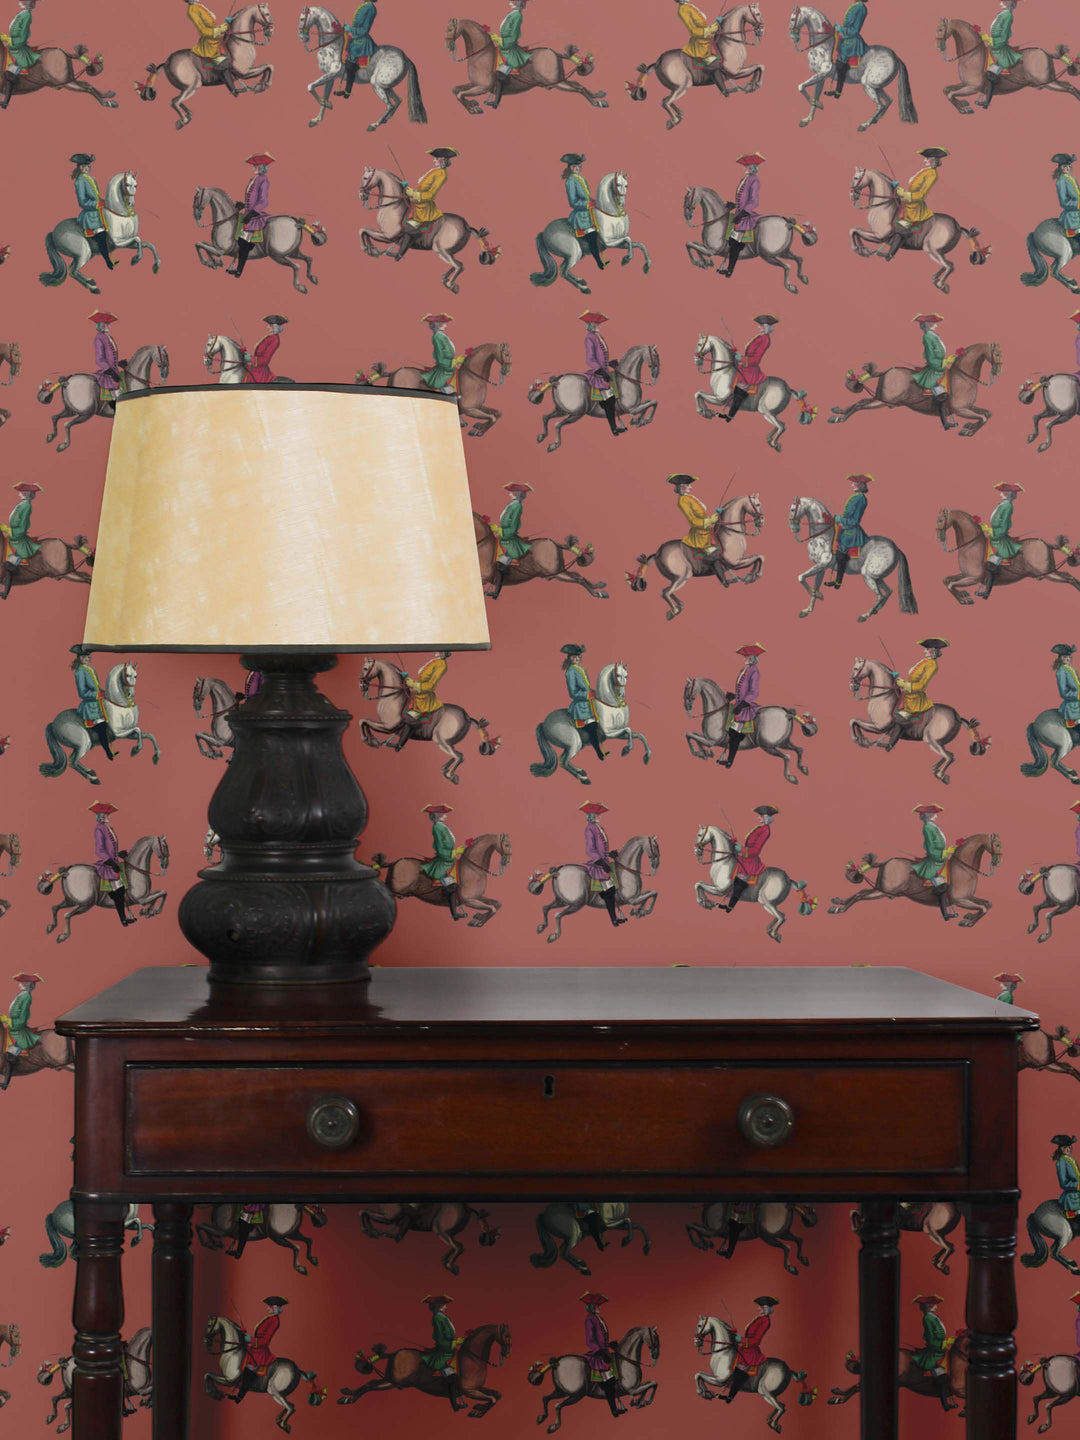 Statement wallpaper featuring horse riders from the 1700's on a sienna background